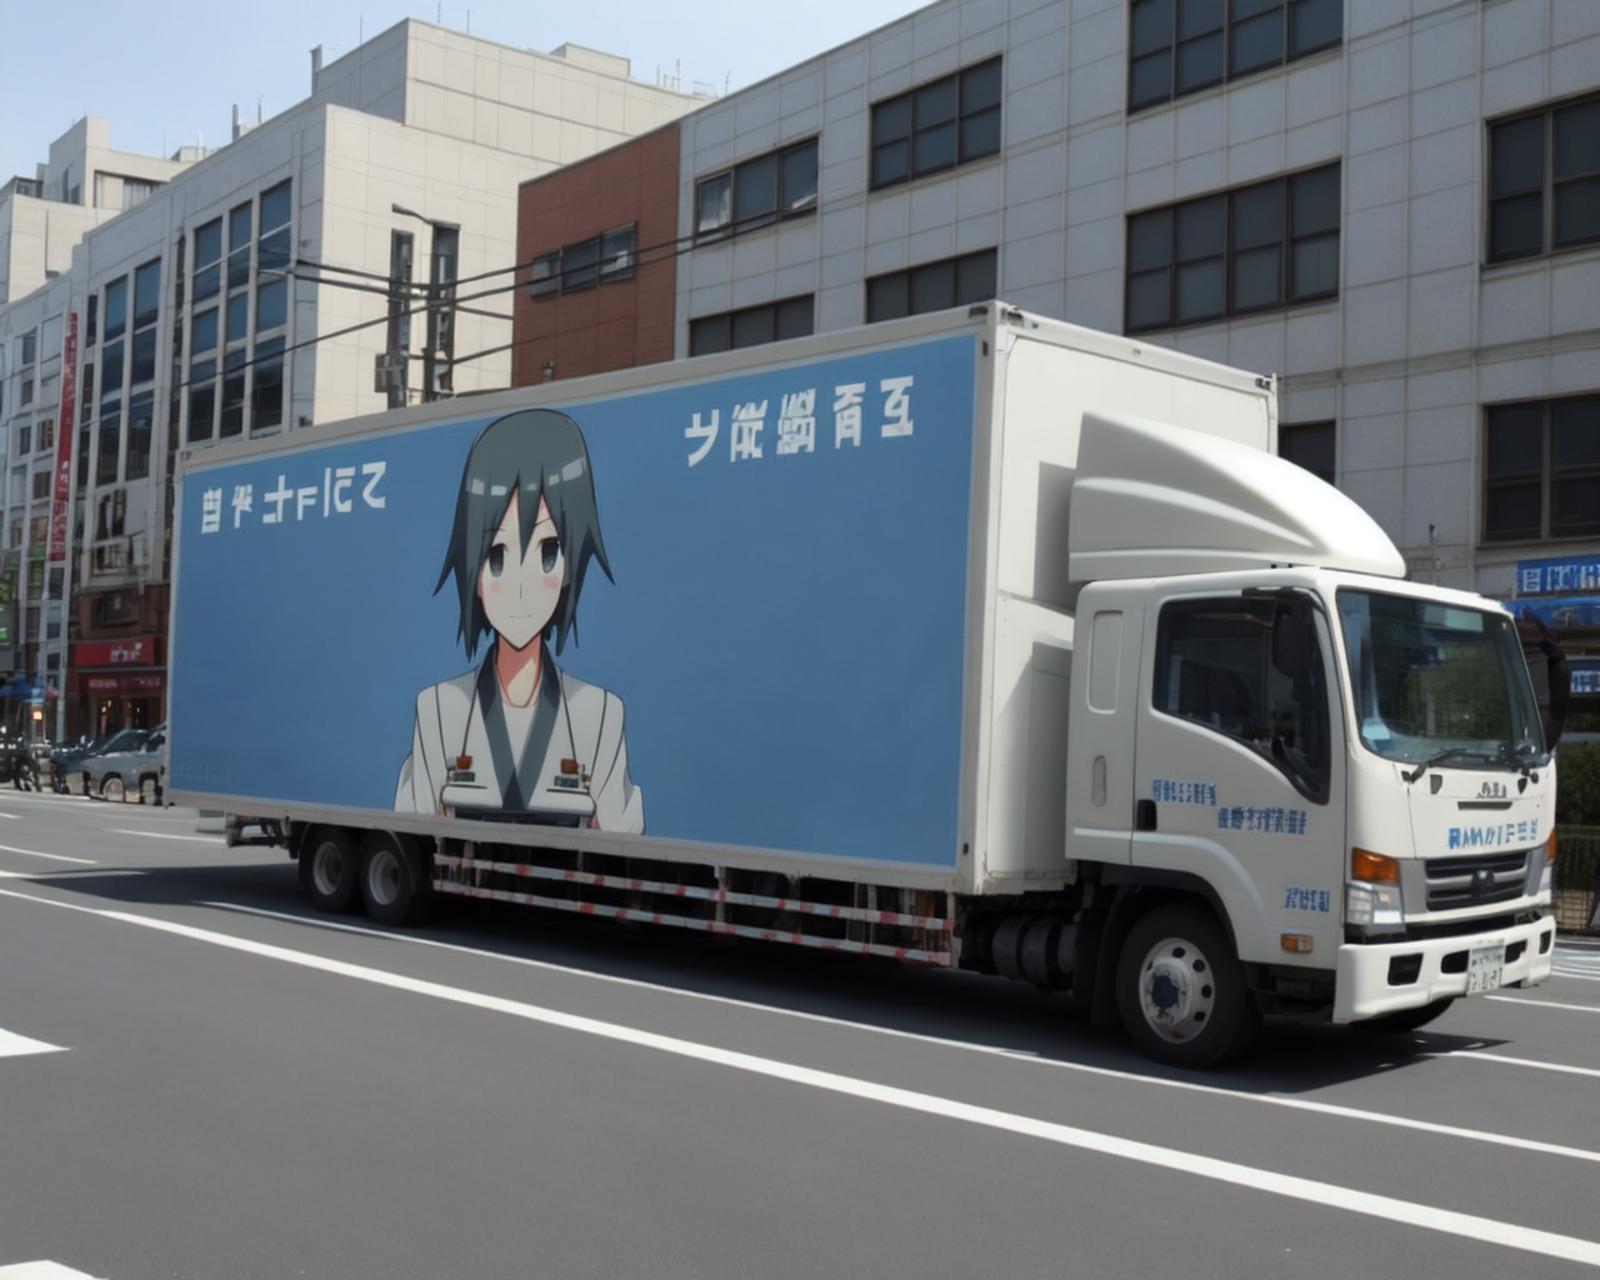 advertising truck image by Liquidn2